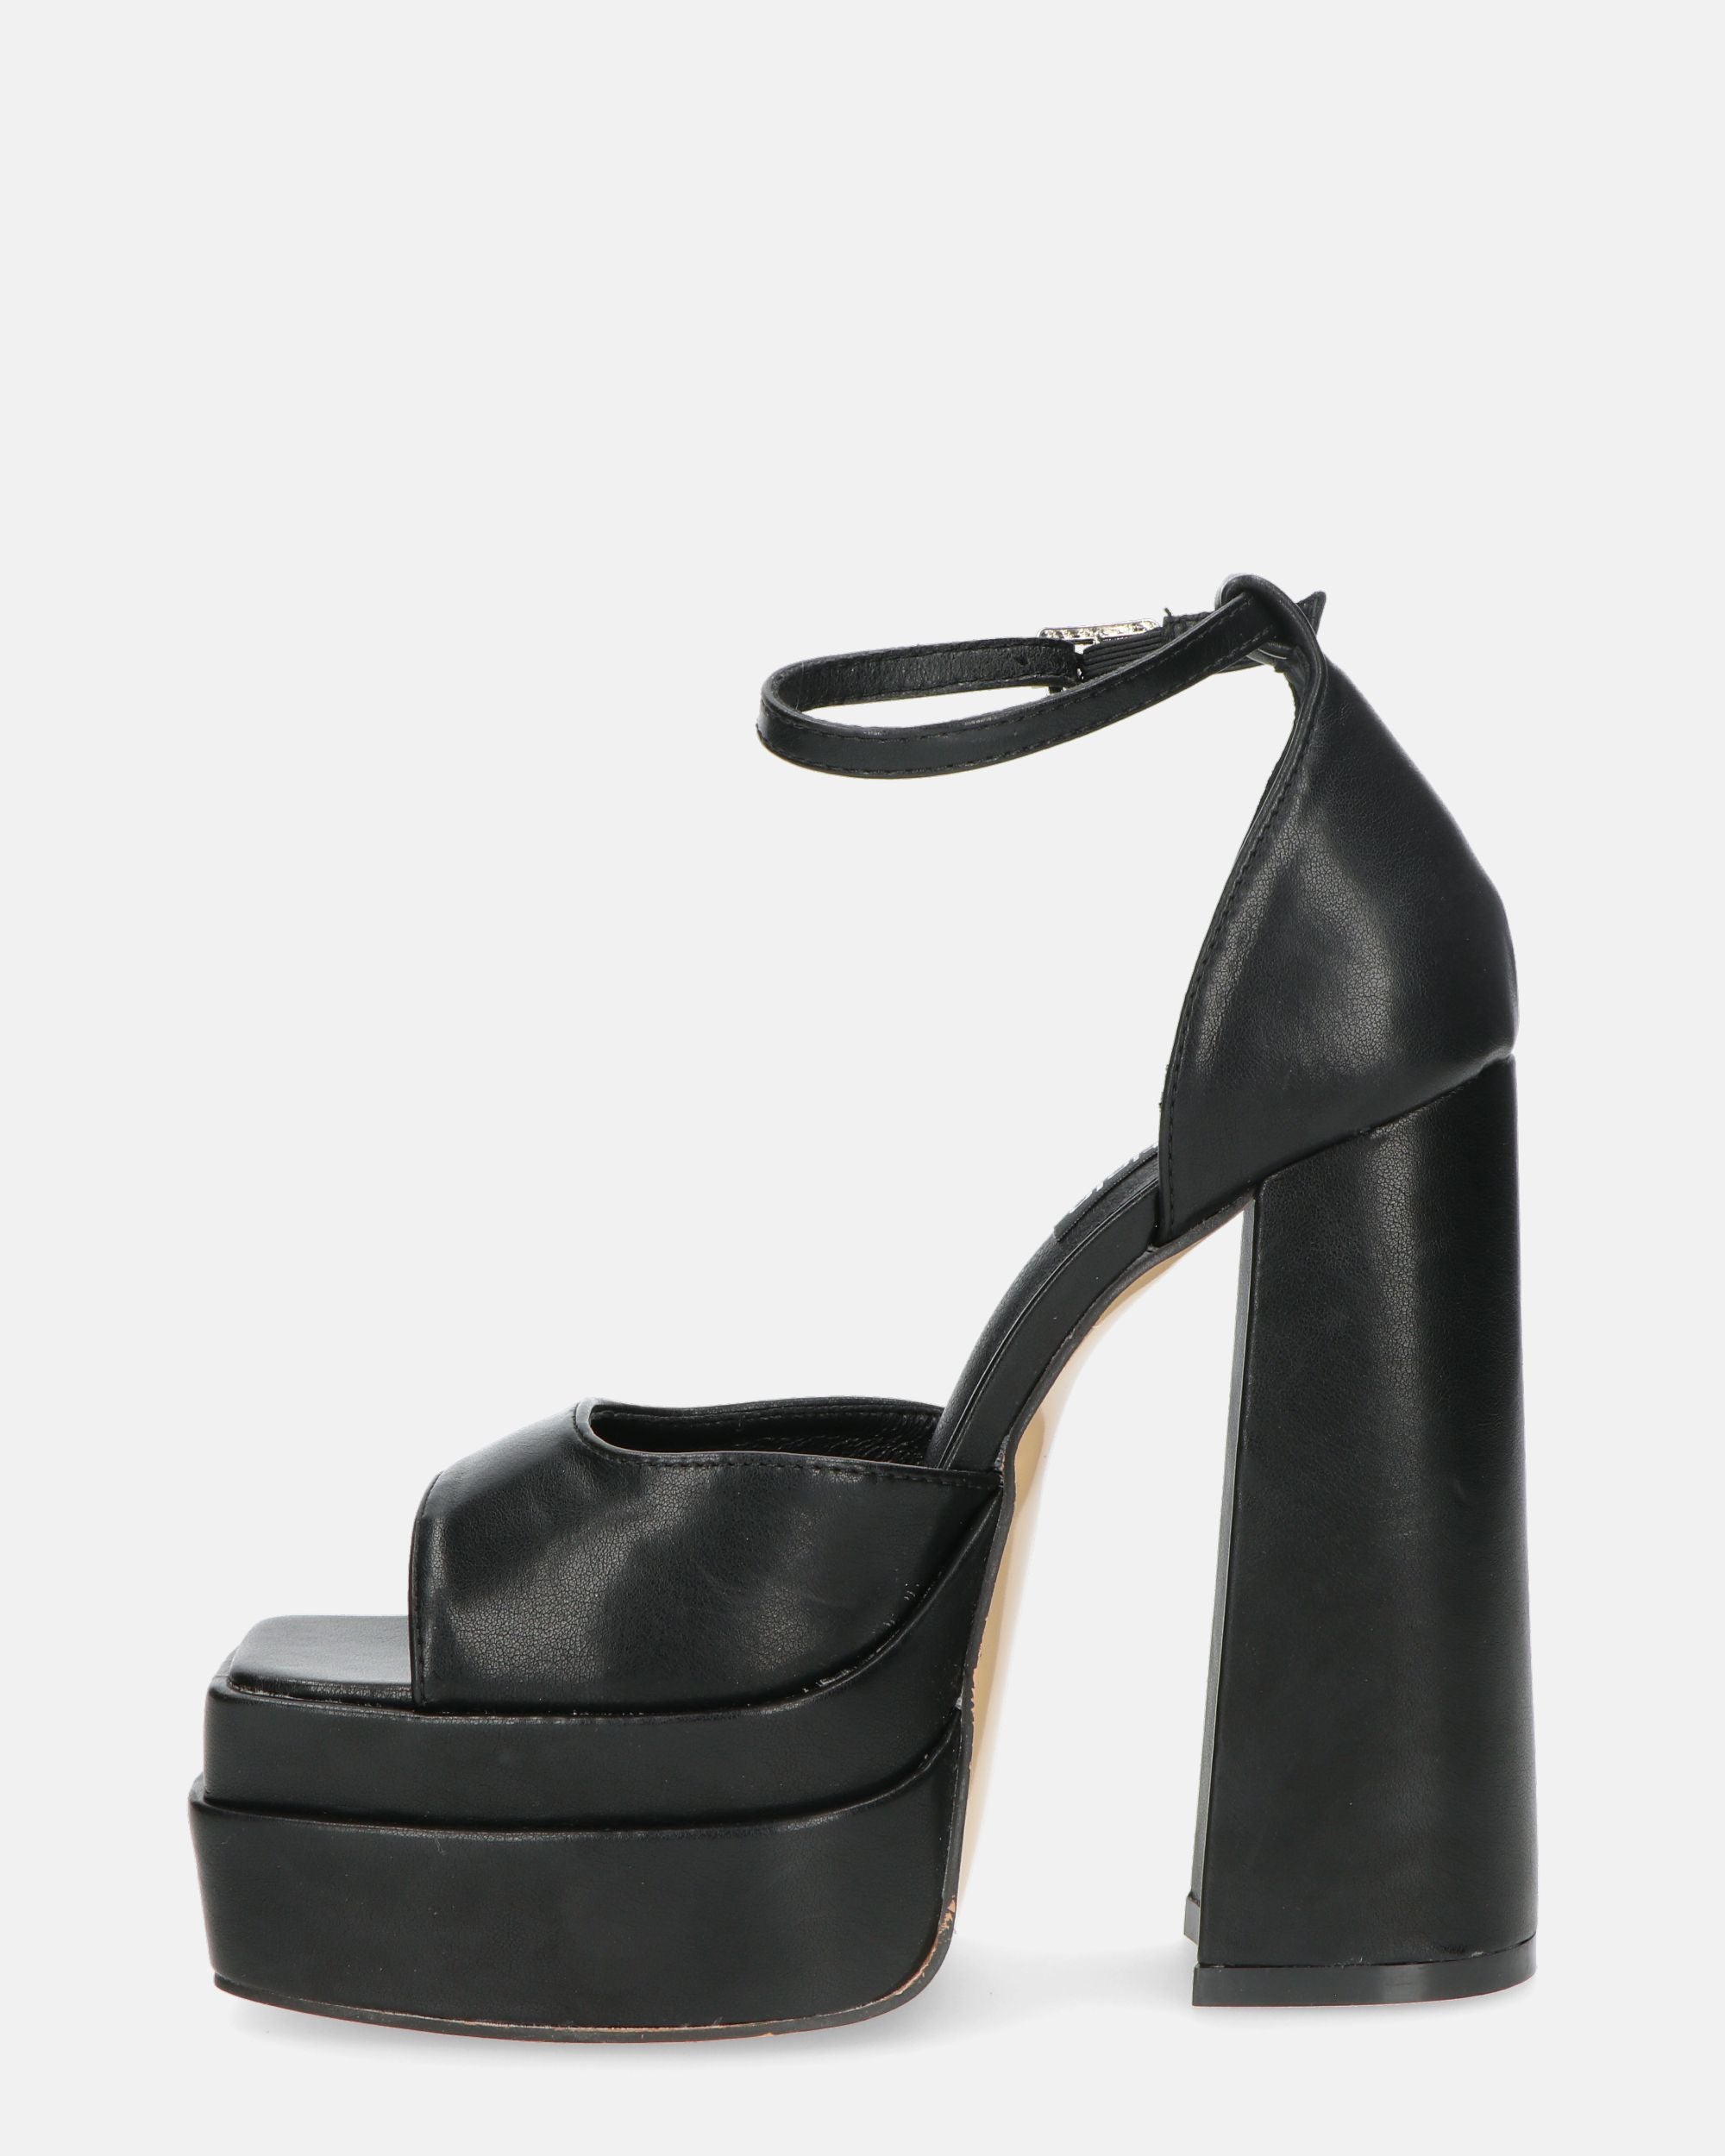 AVA - sandals with high heels in black eco-leather and gems in the strap